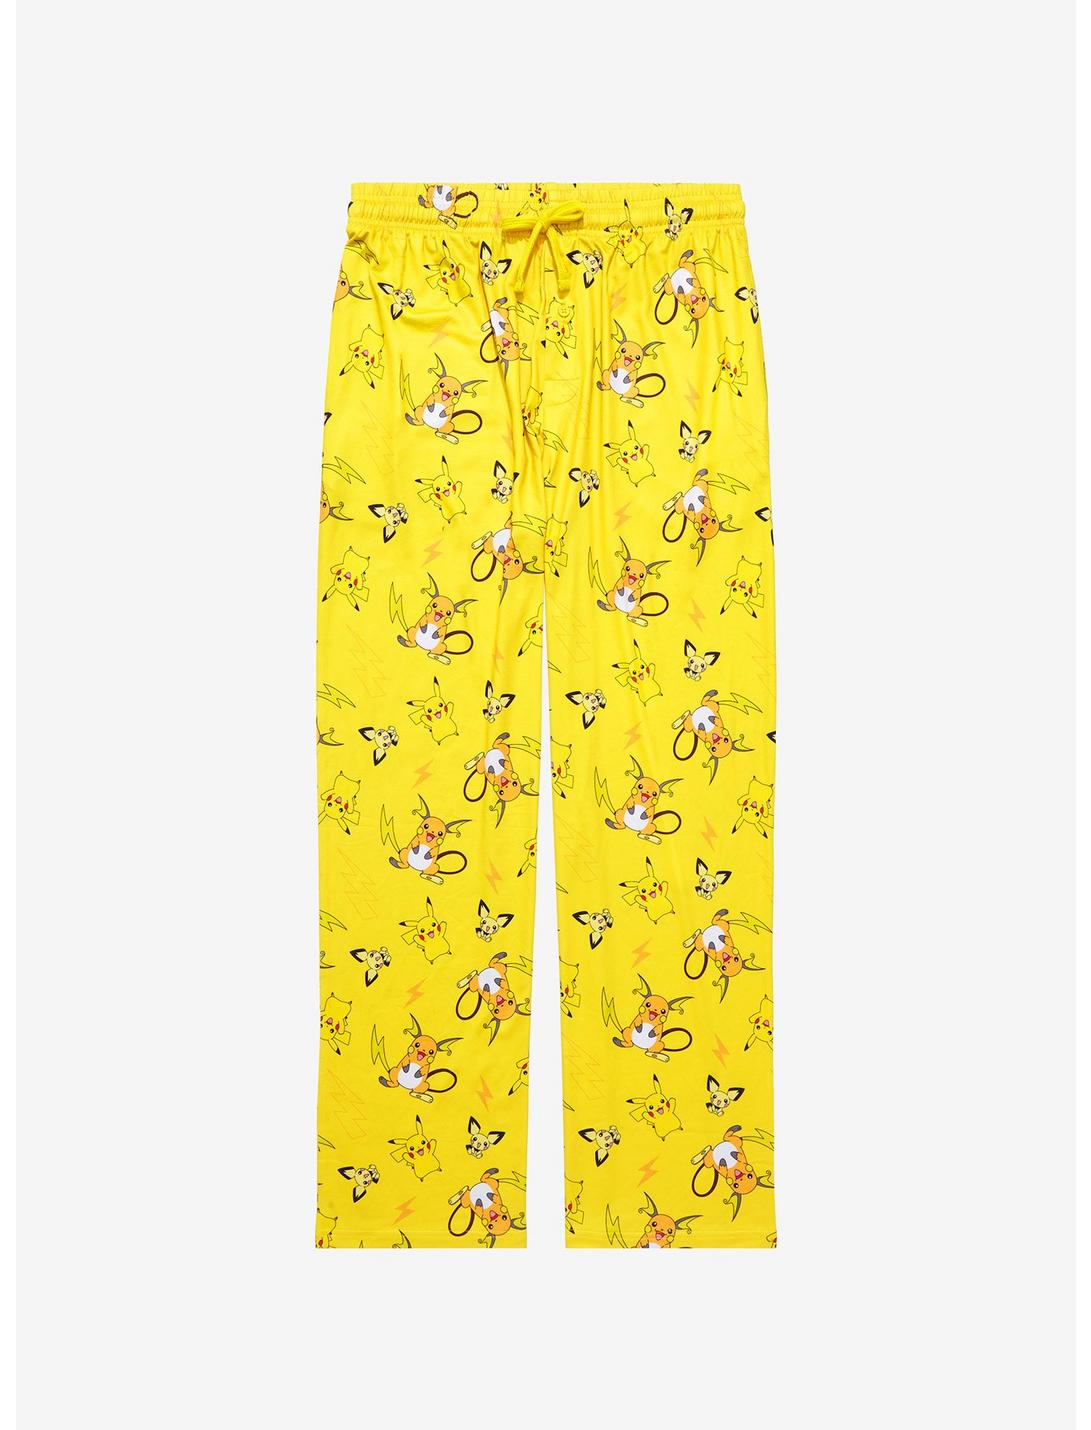 Pokémon Electric Type Evolutions Allover Print Sleep Pants - BoxLunch Exclusive , BRIGHT YELLOW, hi-res